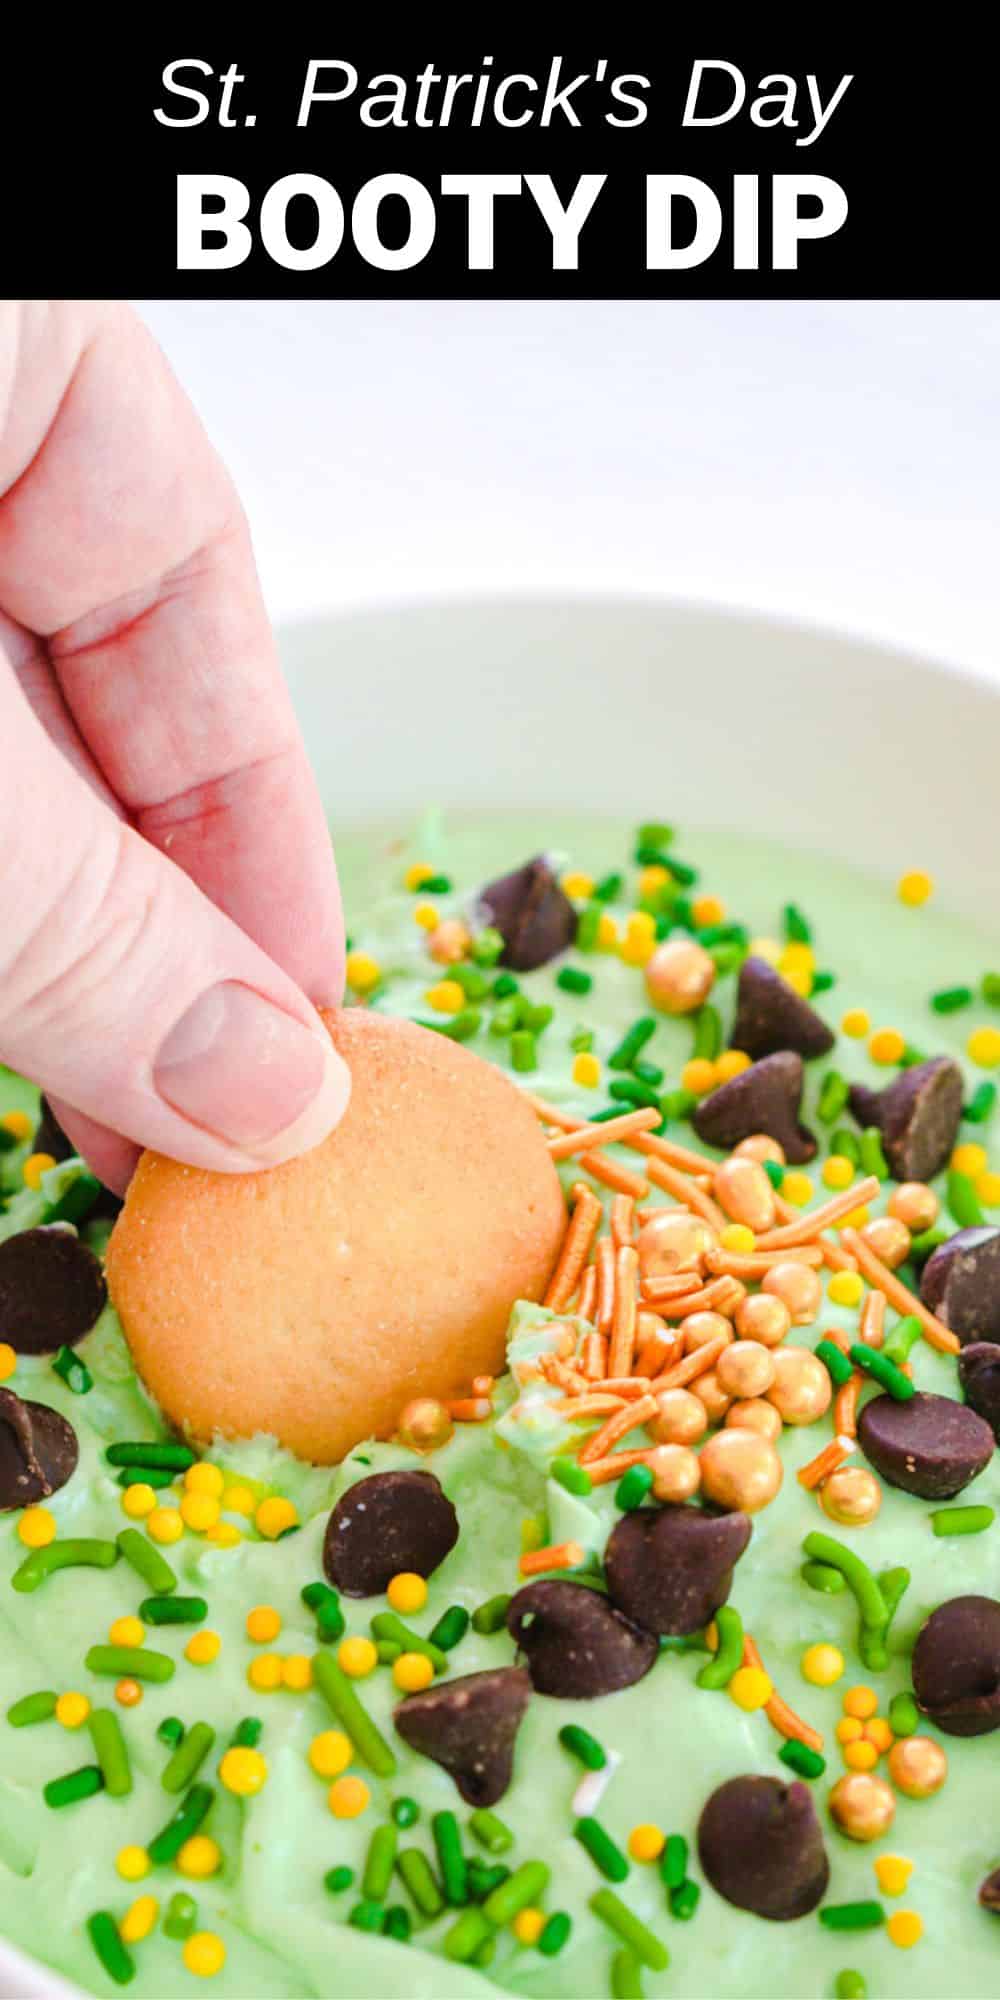 Get ready to satisfy your sweet tooth this St. Patrick's Day with a deliciously indulgent dip that's perfect for any party.